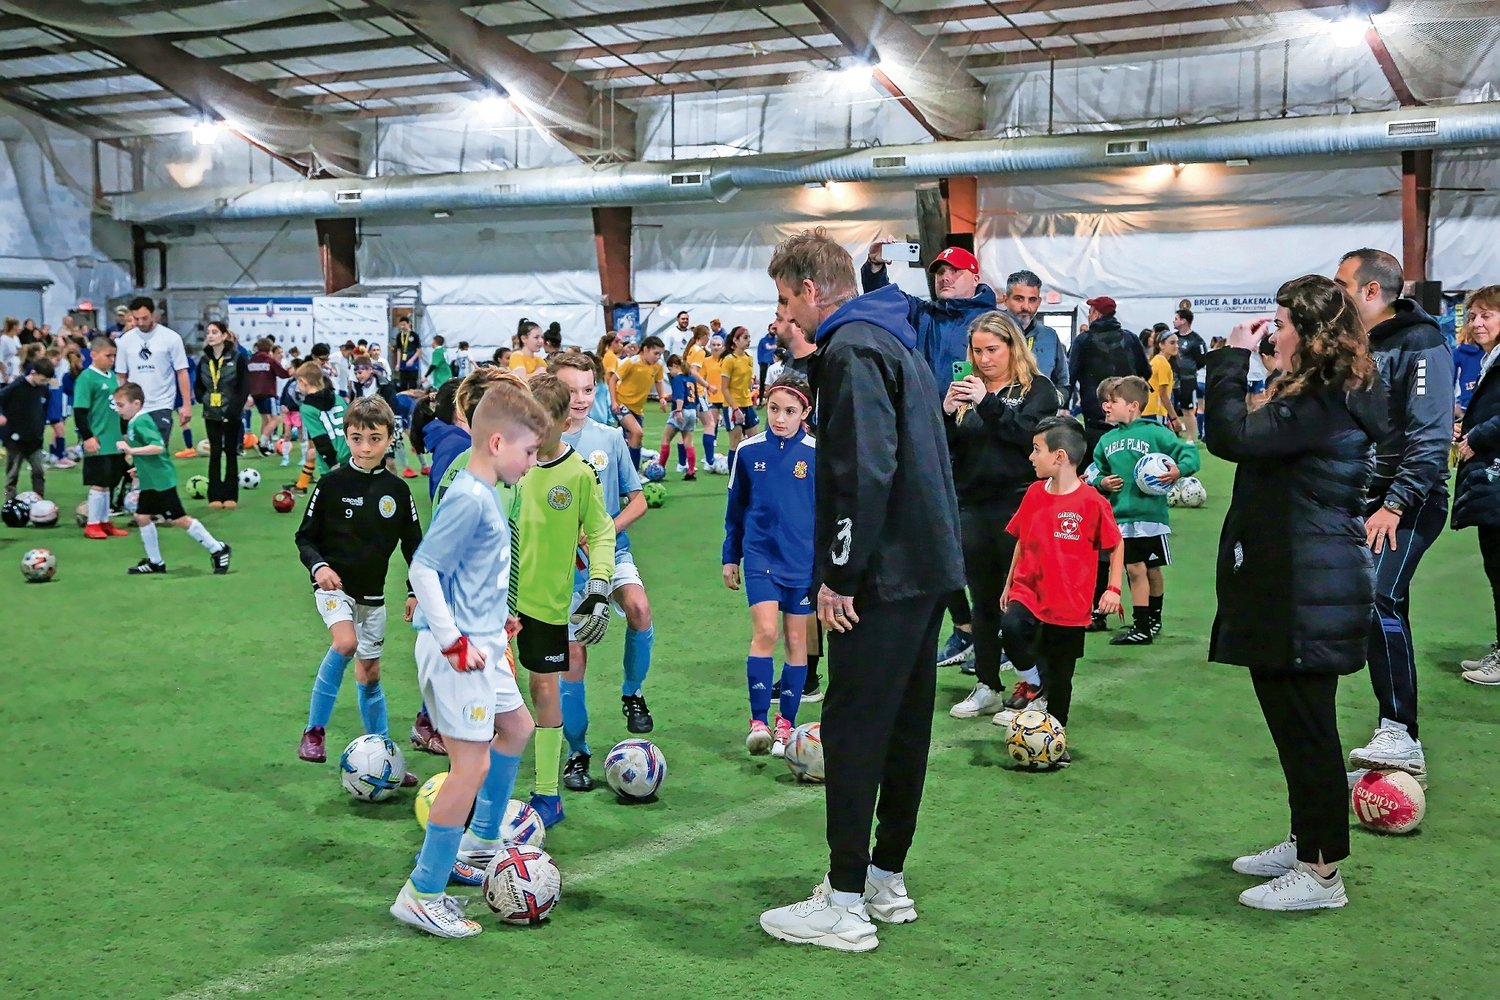 One might say David Beckham has learned everything there is to learn about soccer over a long, storied career — but then again, he hasn't had a chance to interact with some of the future soccer stars from Long Island.